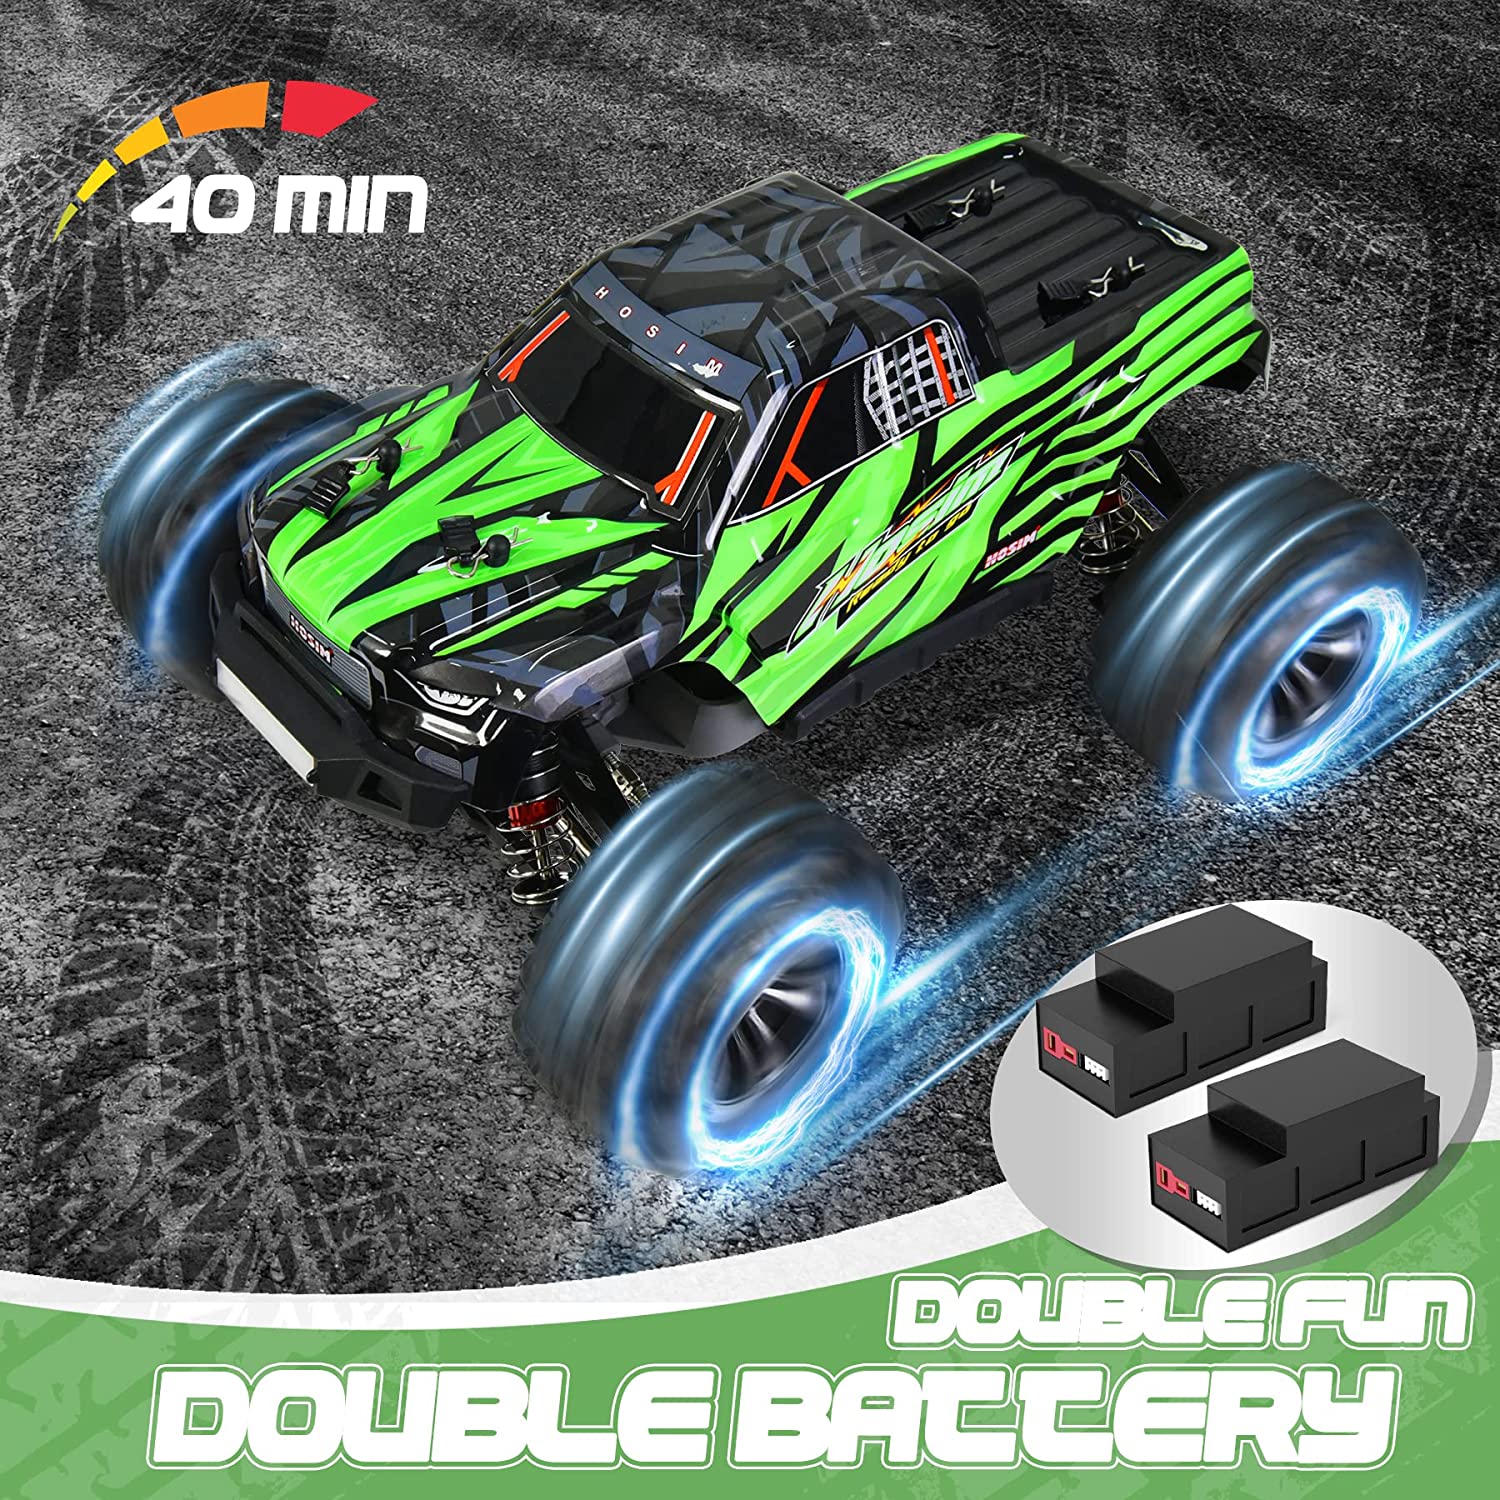 Hosim 1:16 Brushless RC Car 4WD Waterproof 60+KMH Fast Remote Control Truck Radio Cars Off-Road Hobby Grade Toy Crawler Electric Vehicle Gift for Boys Adult Children